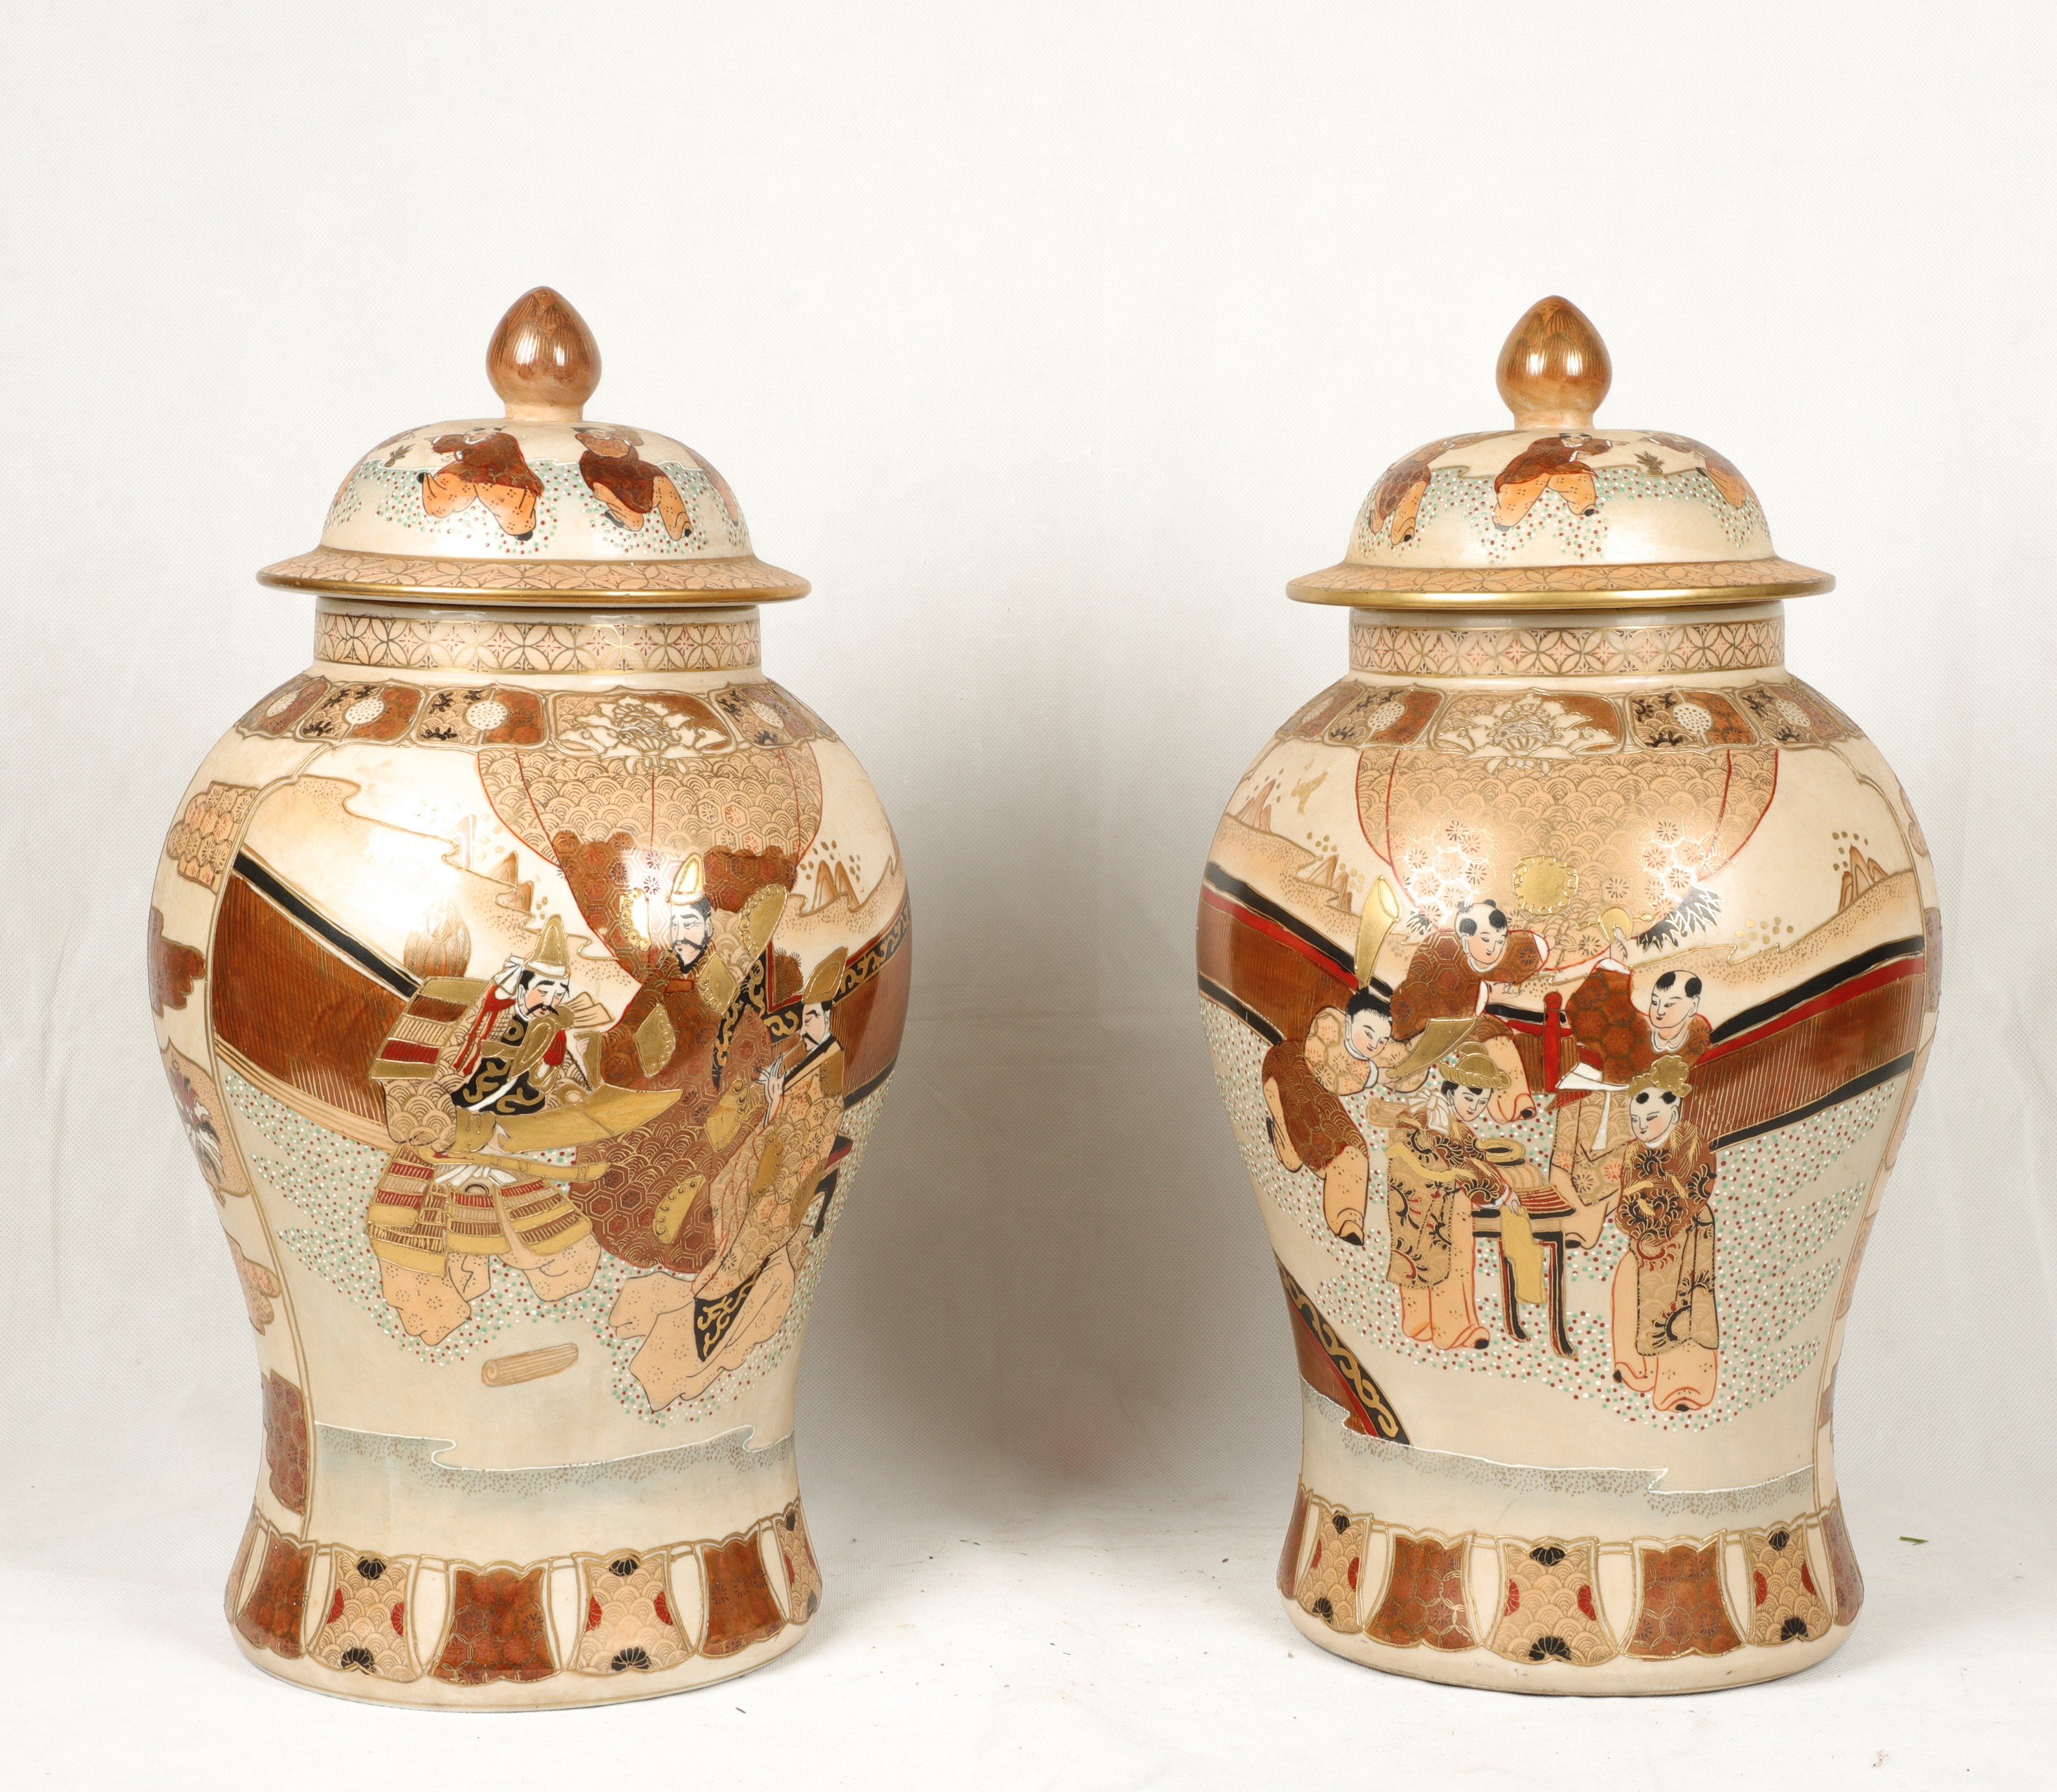 Pair of large Chinese covered jars  27a78d